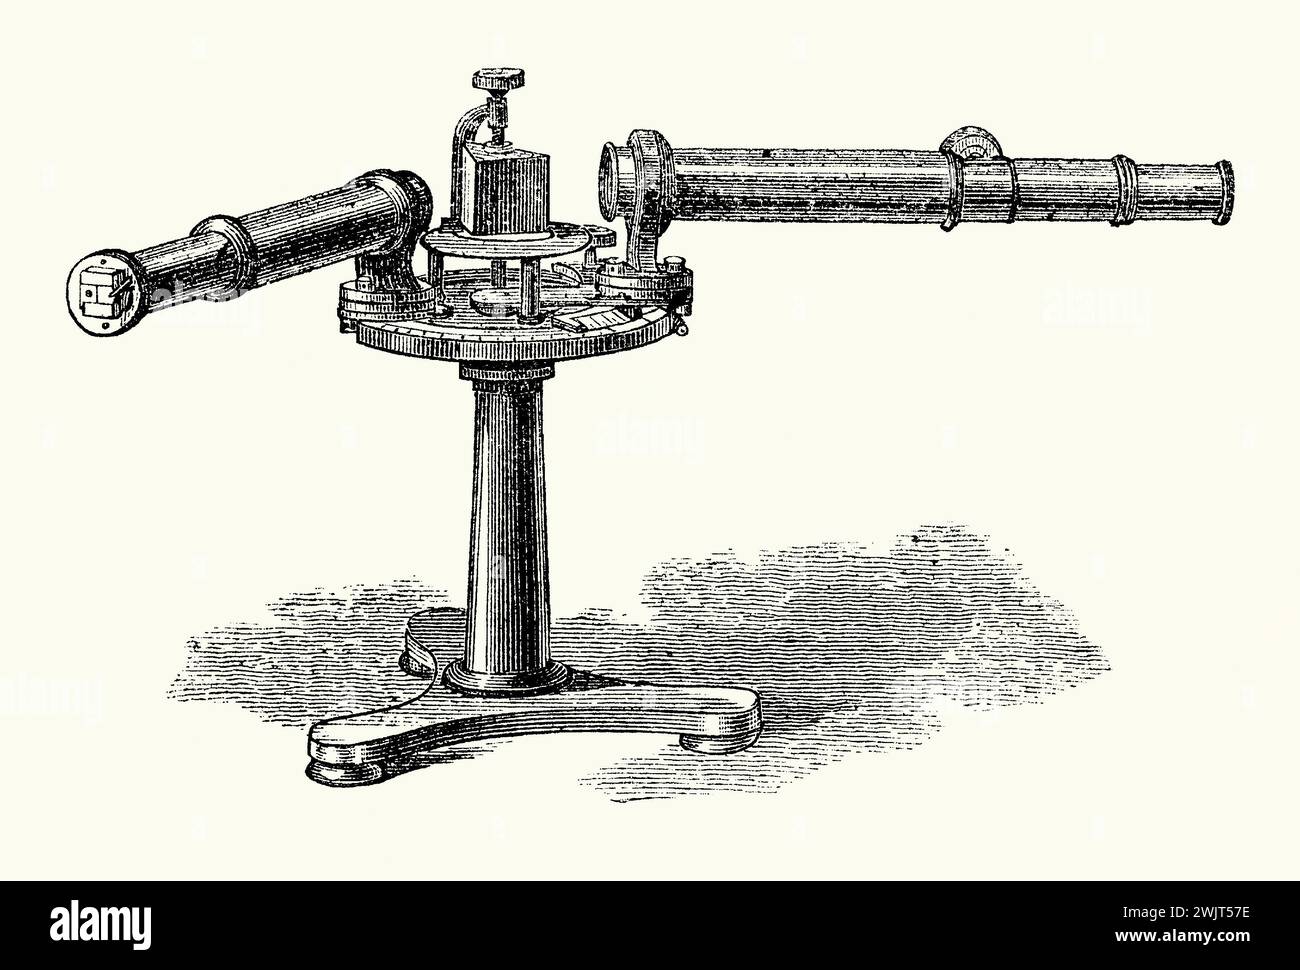 An old engraving of an optical spectrometer (spectrophotometer, spectrograph or spectroscope) from the 1800s. It is from Victorian book of the 1890s on sports, games and pastimes. It is an instrument used to measure properties of light over a specific portion of the electromagnetic spectrum, and is typically used to analyse materials. Spectroscopy is a fundamental tool in the fields of astronomy, chemistry, materials science and physics. It enables the composition, physical structure and electronic structure of matter to be investigated at atomic, molecular and macro scale. Stock Photo